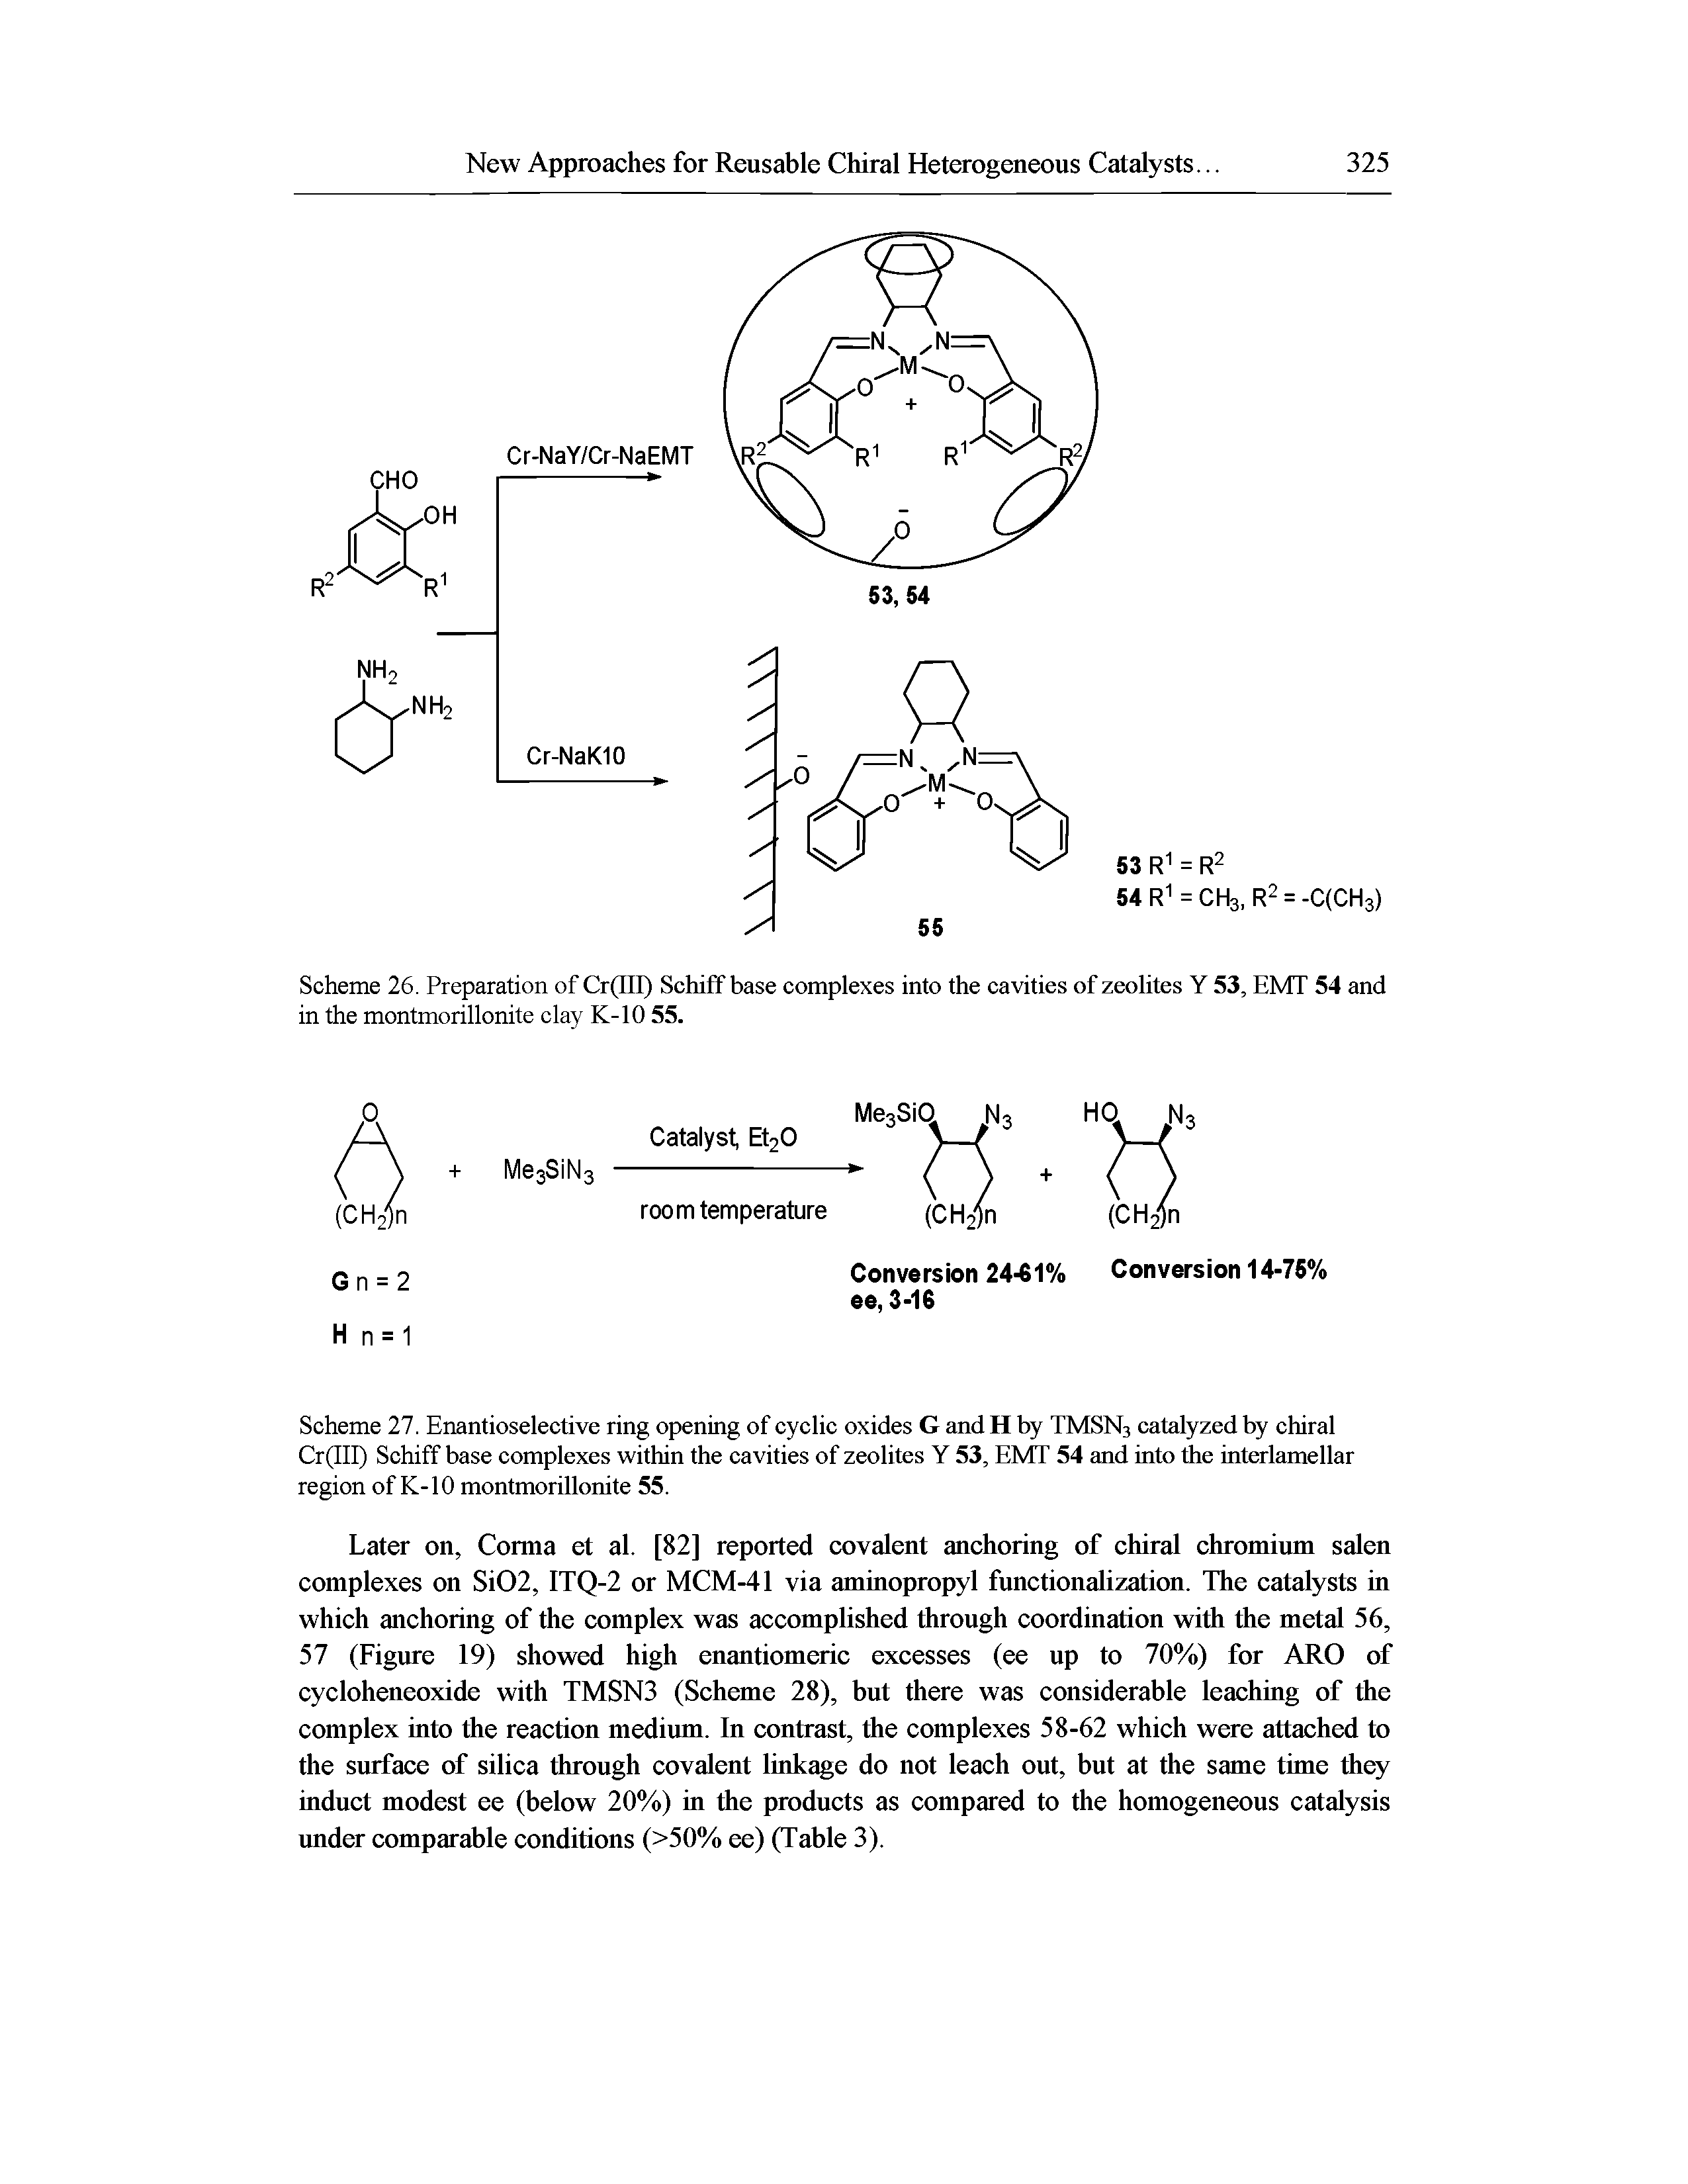 Scheme 27. Enantioselective ring opening of cyclic oxides G and H by TMSN3 catalyzed by chiral Cr(III) Schiff base complexes within the cavities of zeolites Y 53, EMT 54 and into the interlamellar region of K-10 montmorillonite 55.